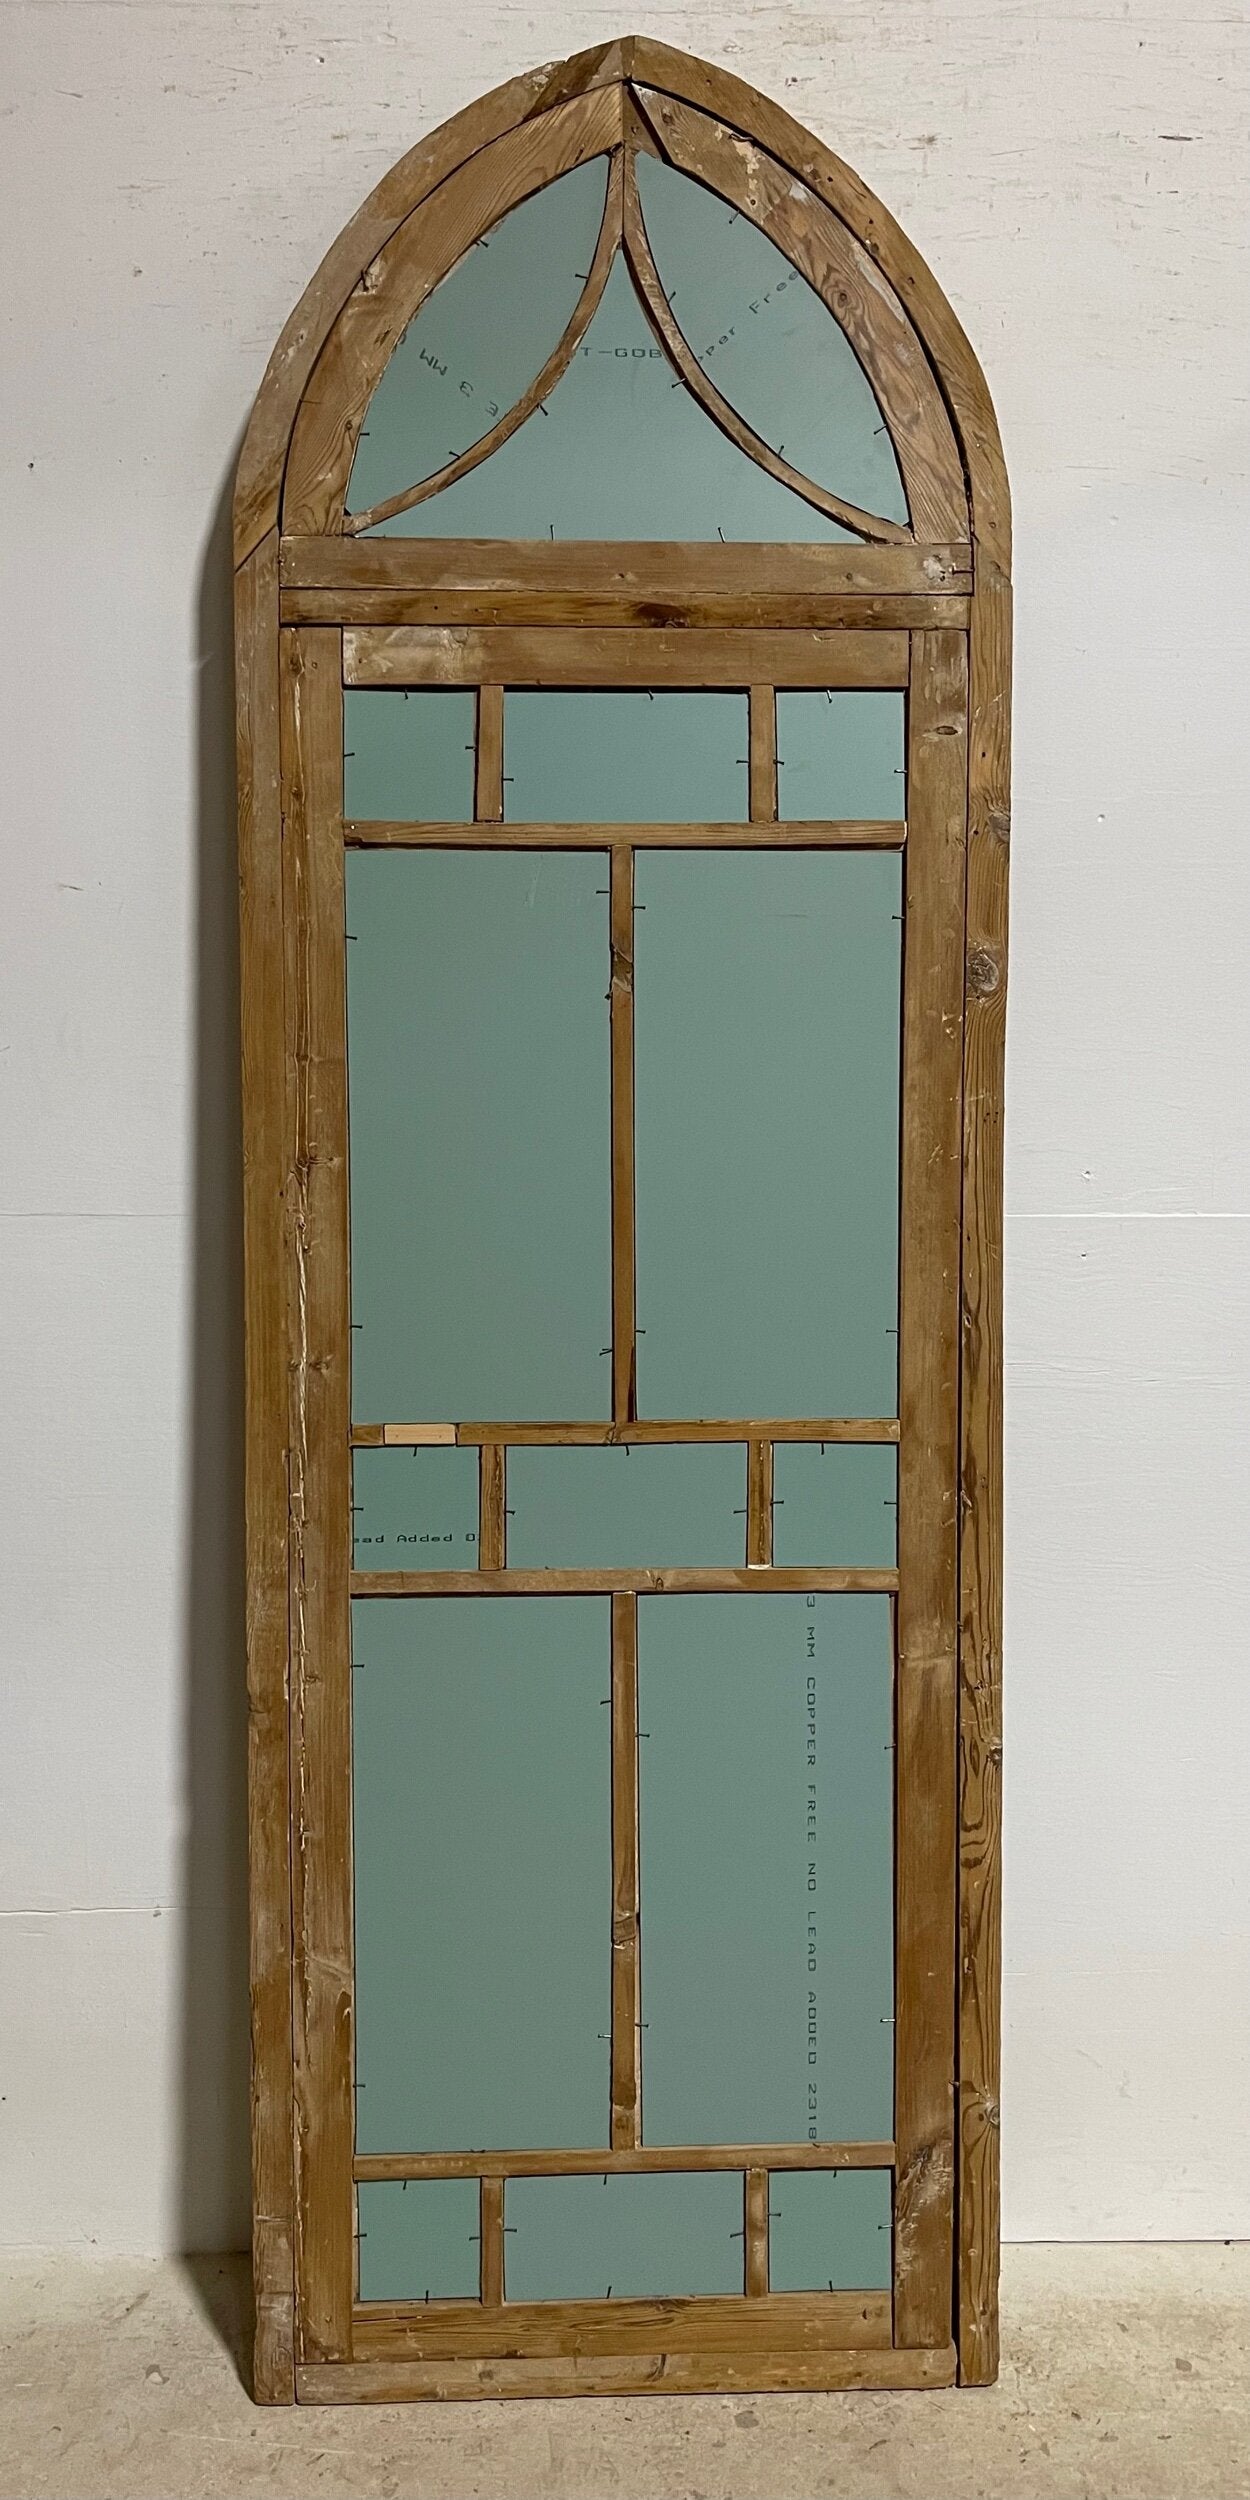 Framed arched panel with Mirror (94.5x31) H0292s